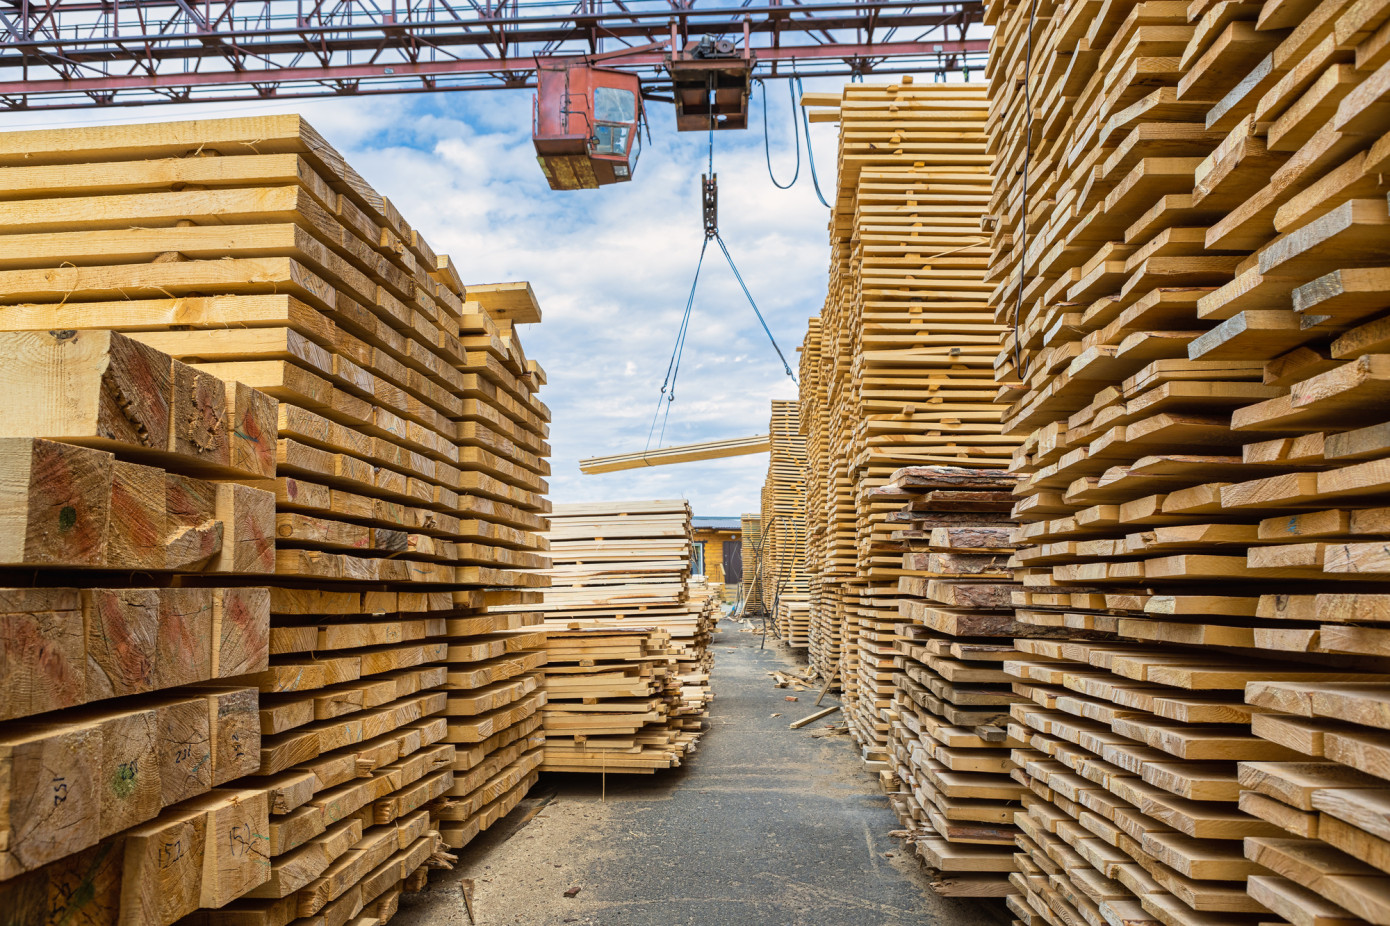 In February, price for lumber exported from New Zealand contracts 16%